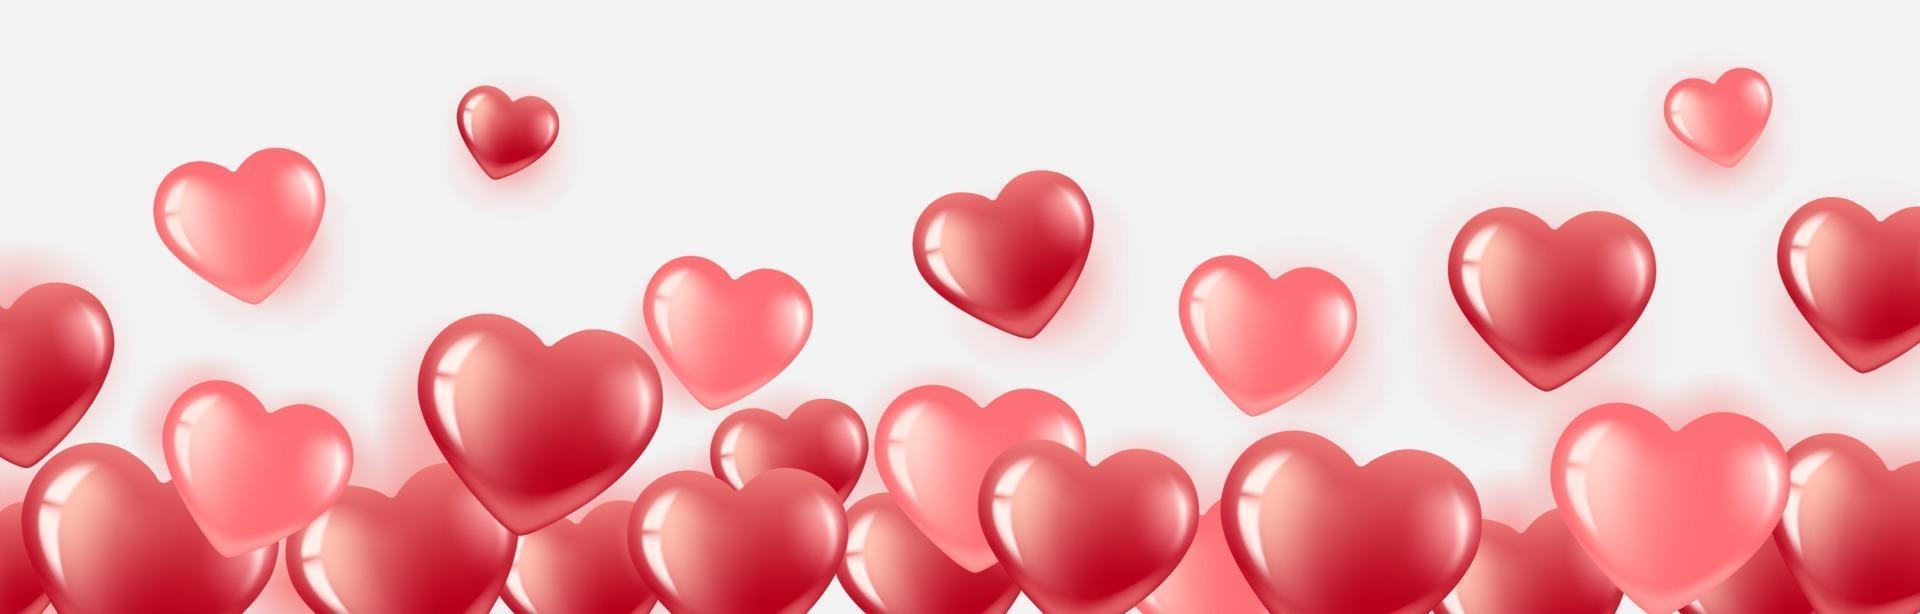 Heart banner with pink and red balloons vector